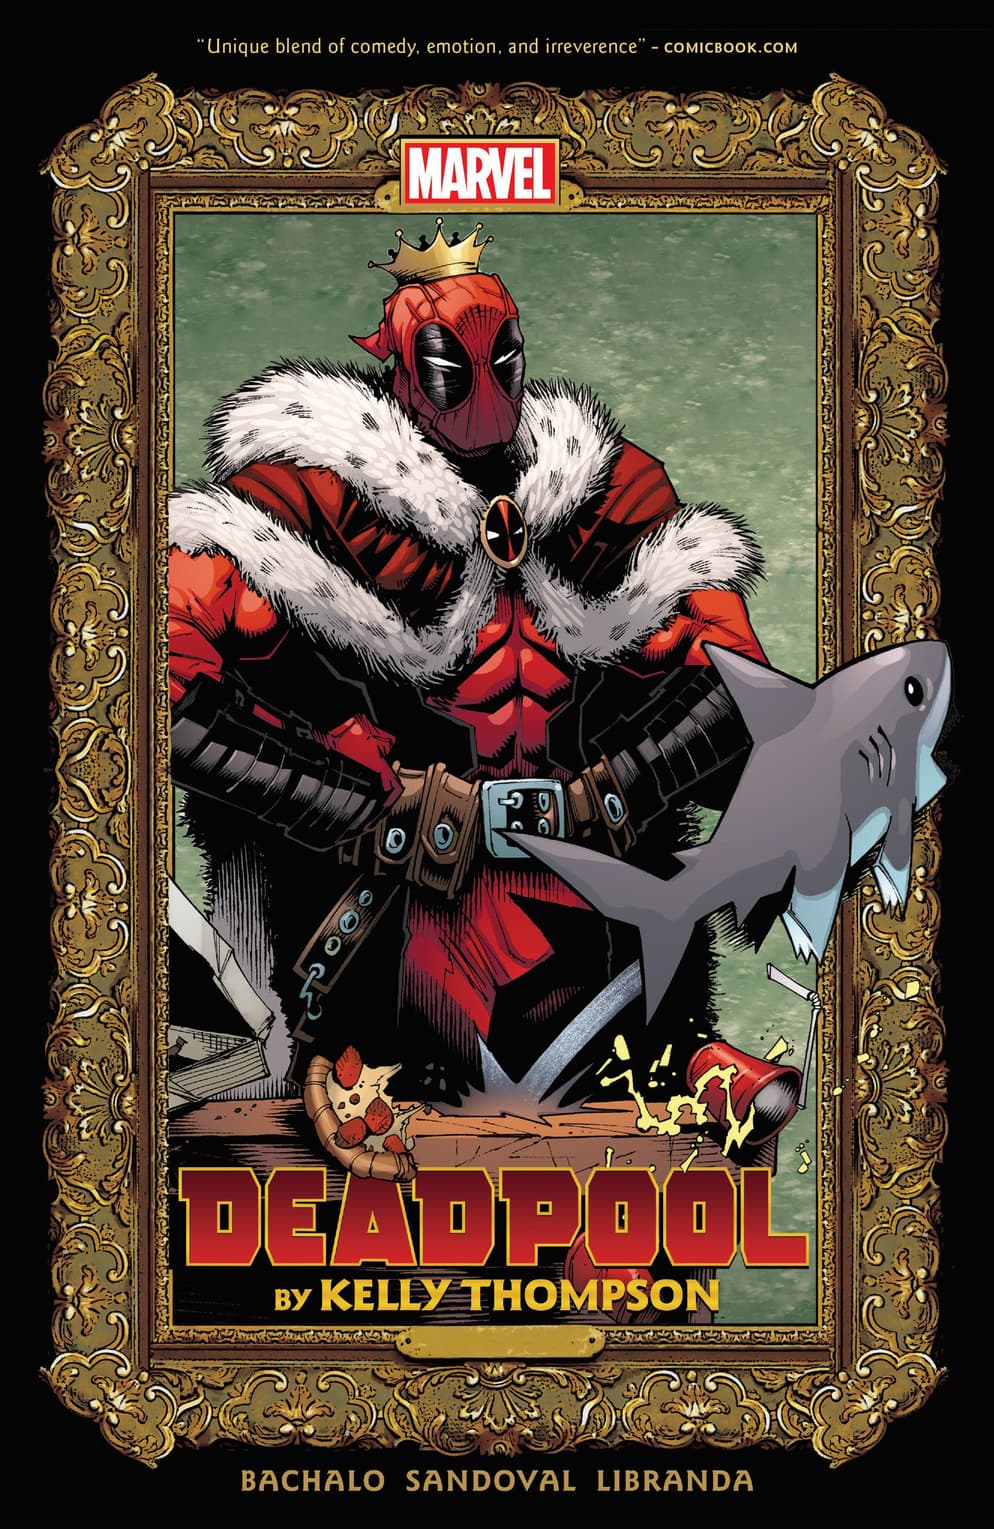 DEADPOOL BY KELLY THOMPSON cover by Chris Bachalo